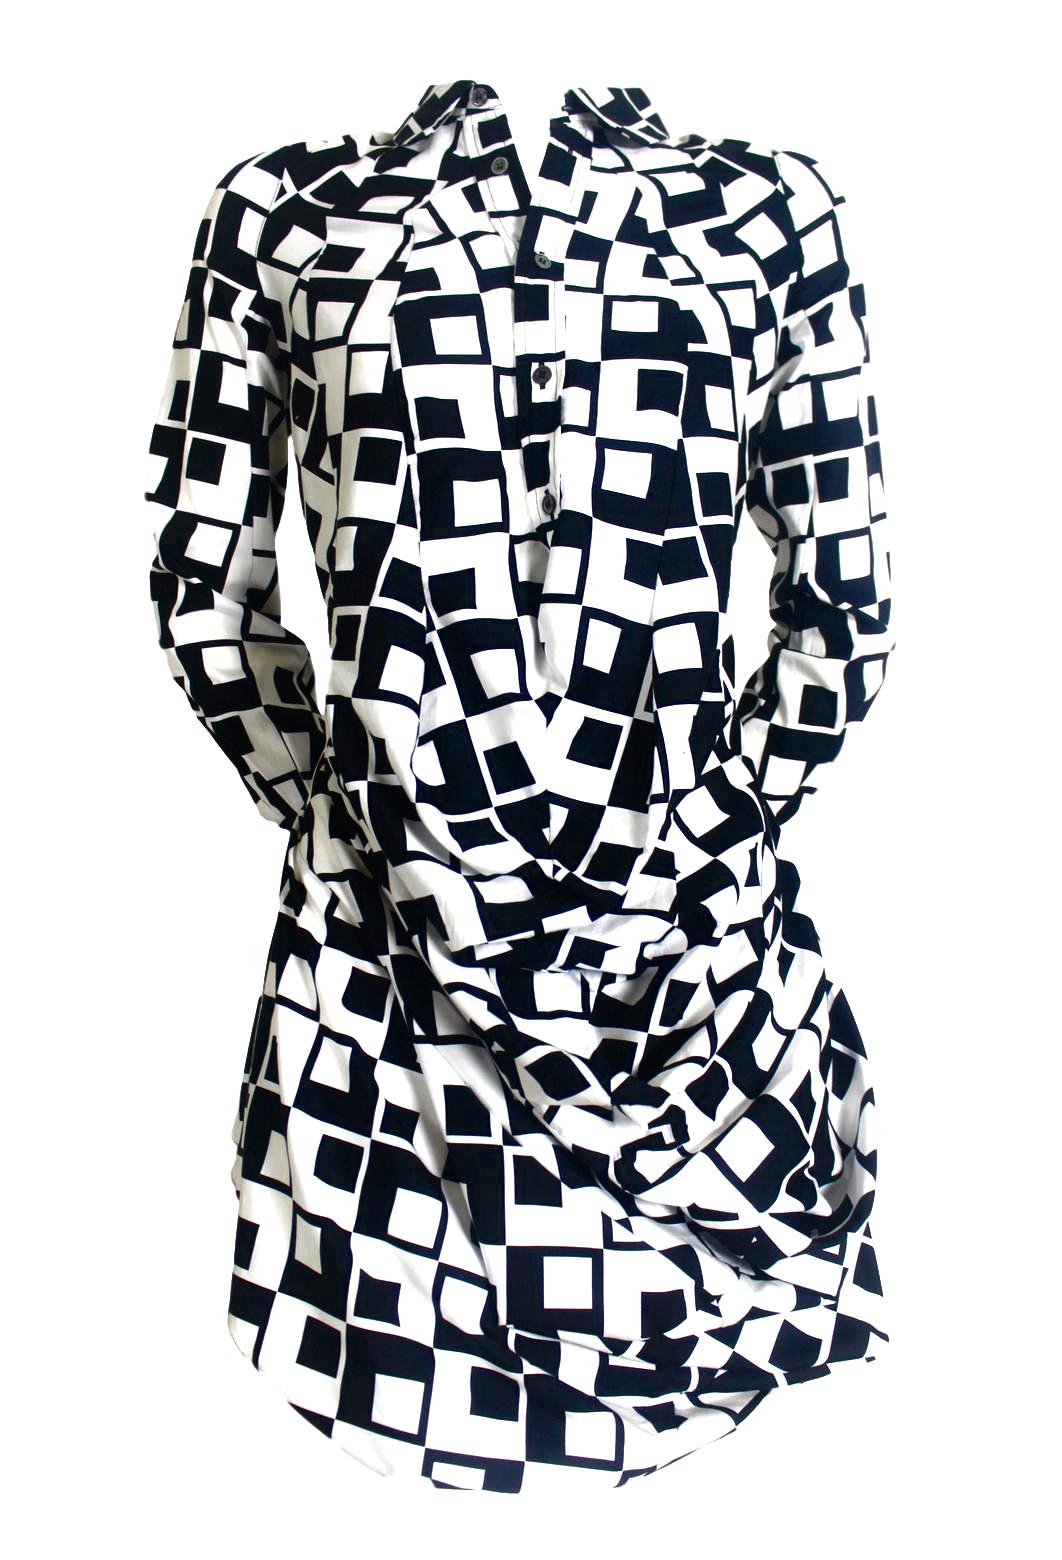 Comme des Garcons Junya Watanabe Geometric Dress AD 2009 For Sale 1